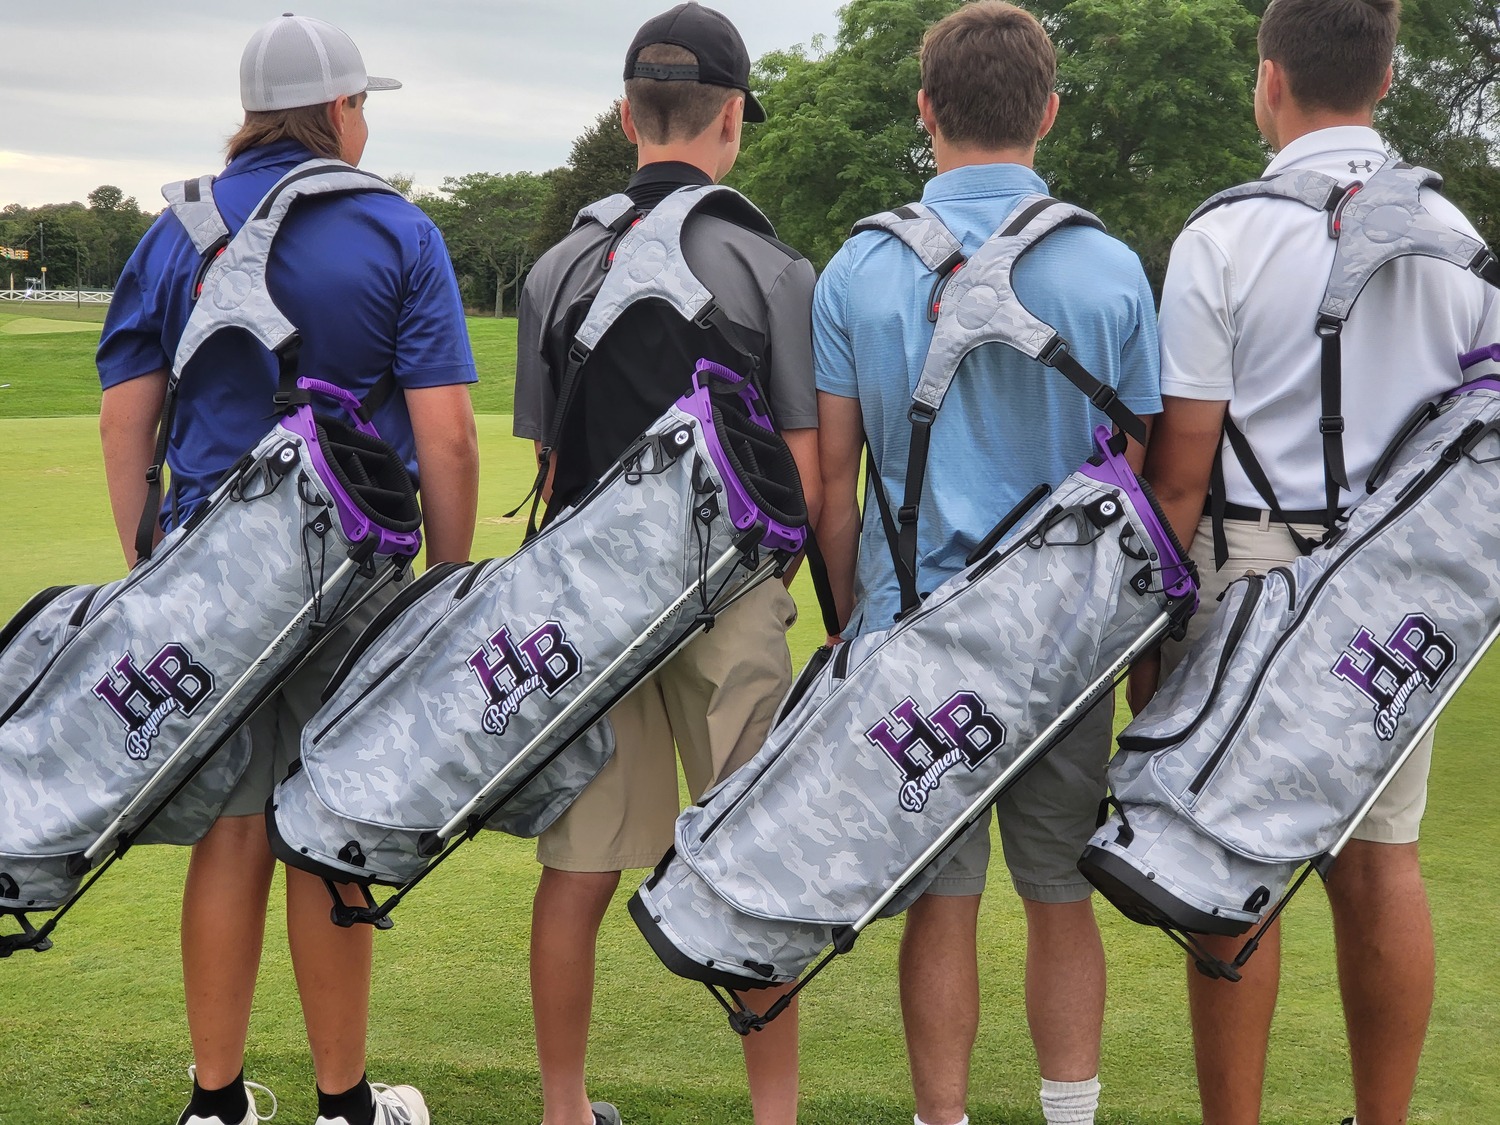 Members of the Hampton Bays golf team show off their new bags donated by the Eugene Francolini Golf Initiative through the AJJ Scholarship Fund.